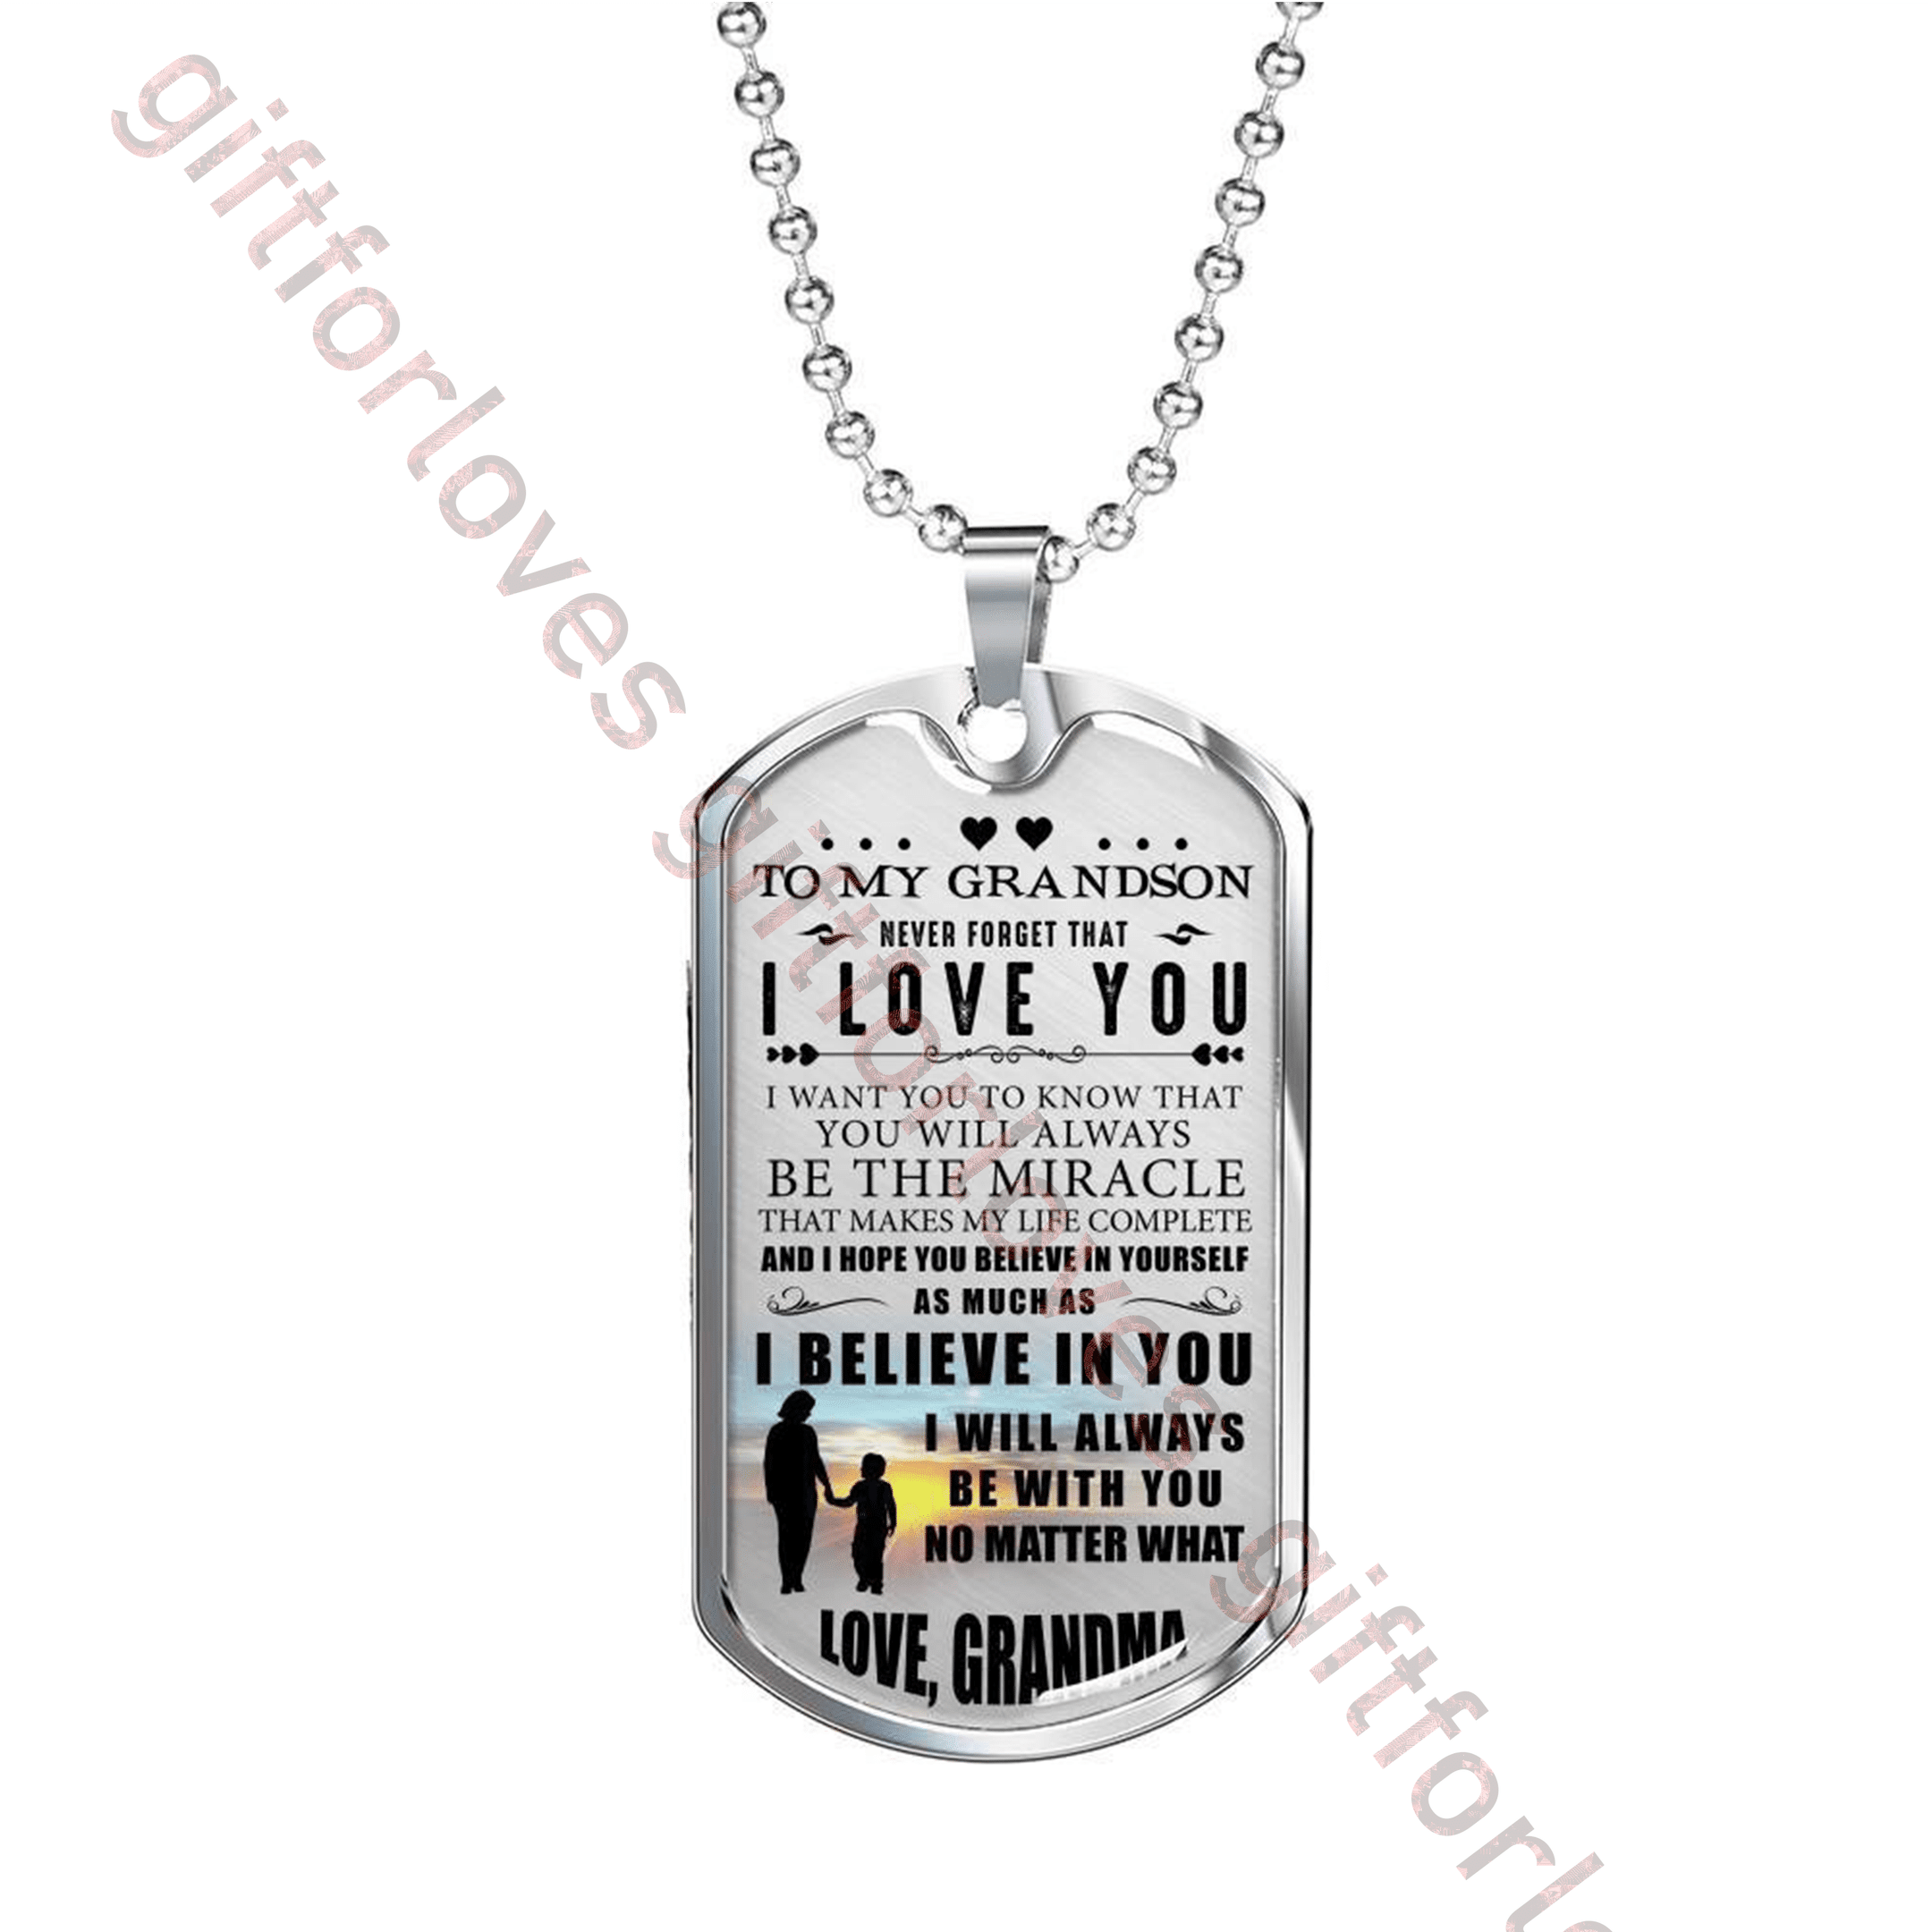 GRANDSON DOG TAG, TO MY GRANDSON DOG TAG, GIFT FOR GRANDSON FROM GRANDMA, AMAZING GRANDSON NECKLACE-1